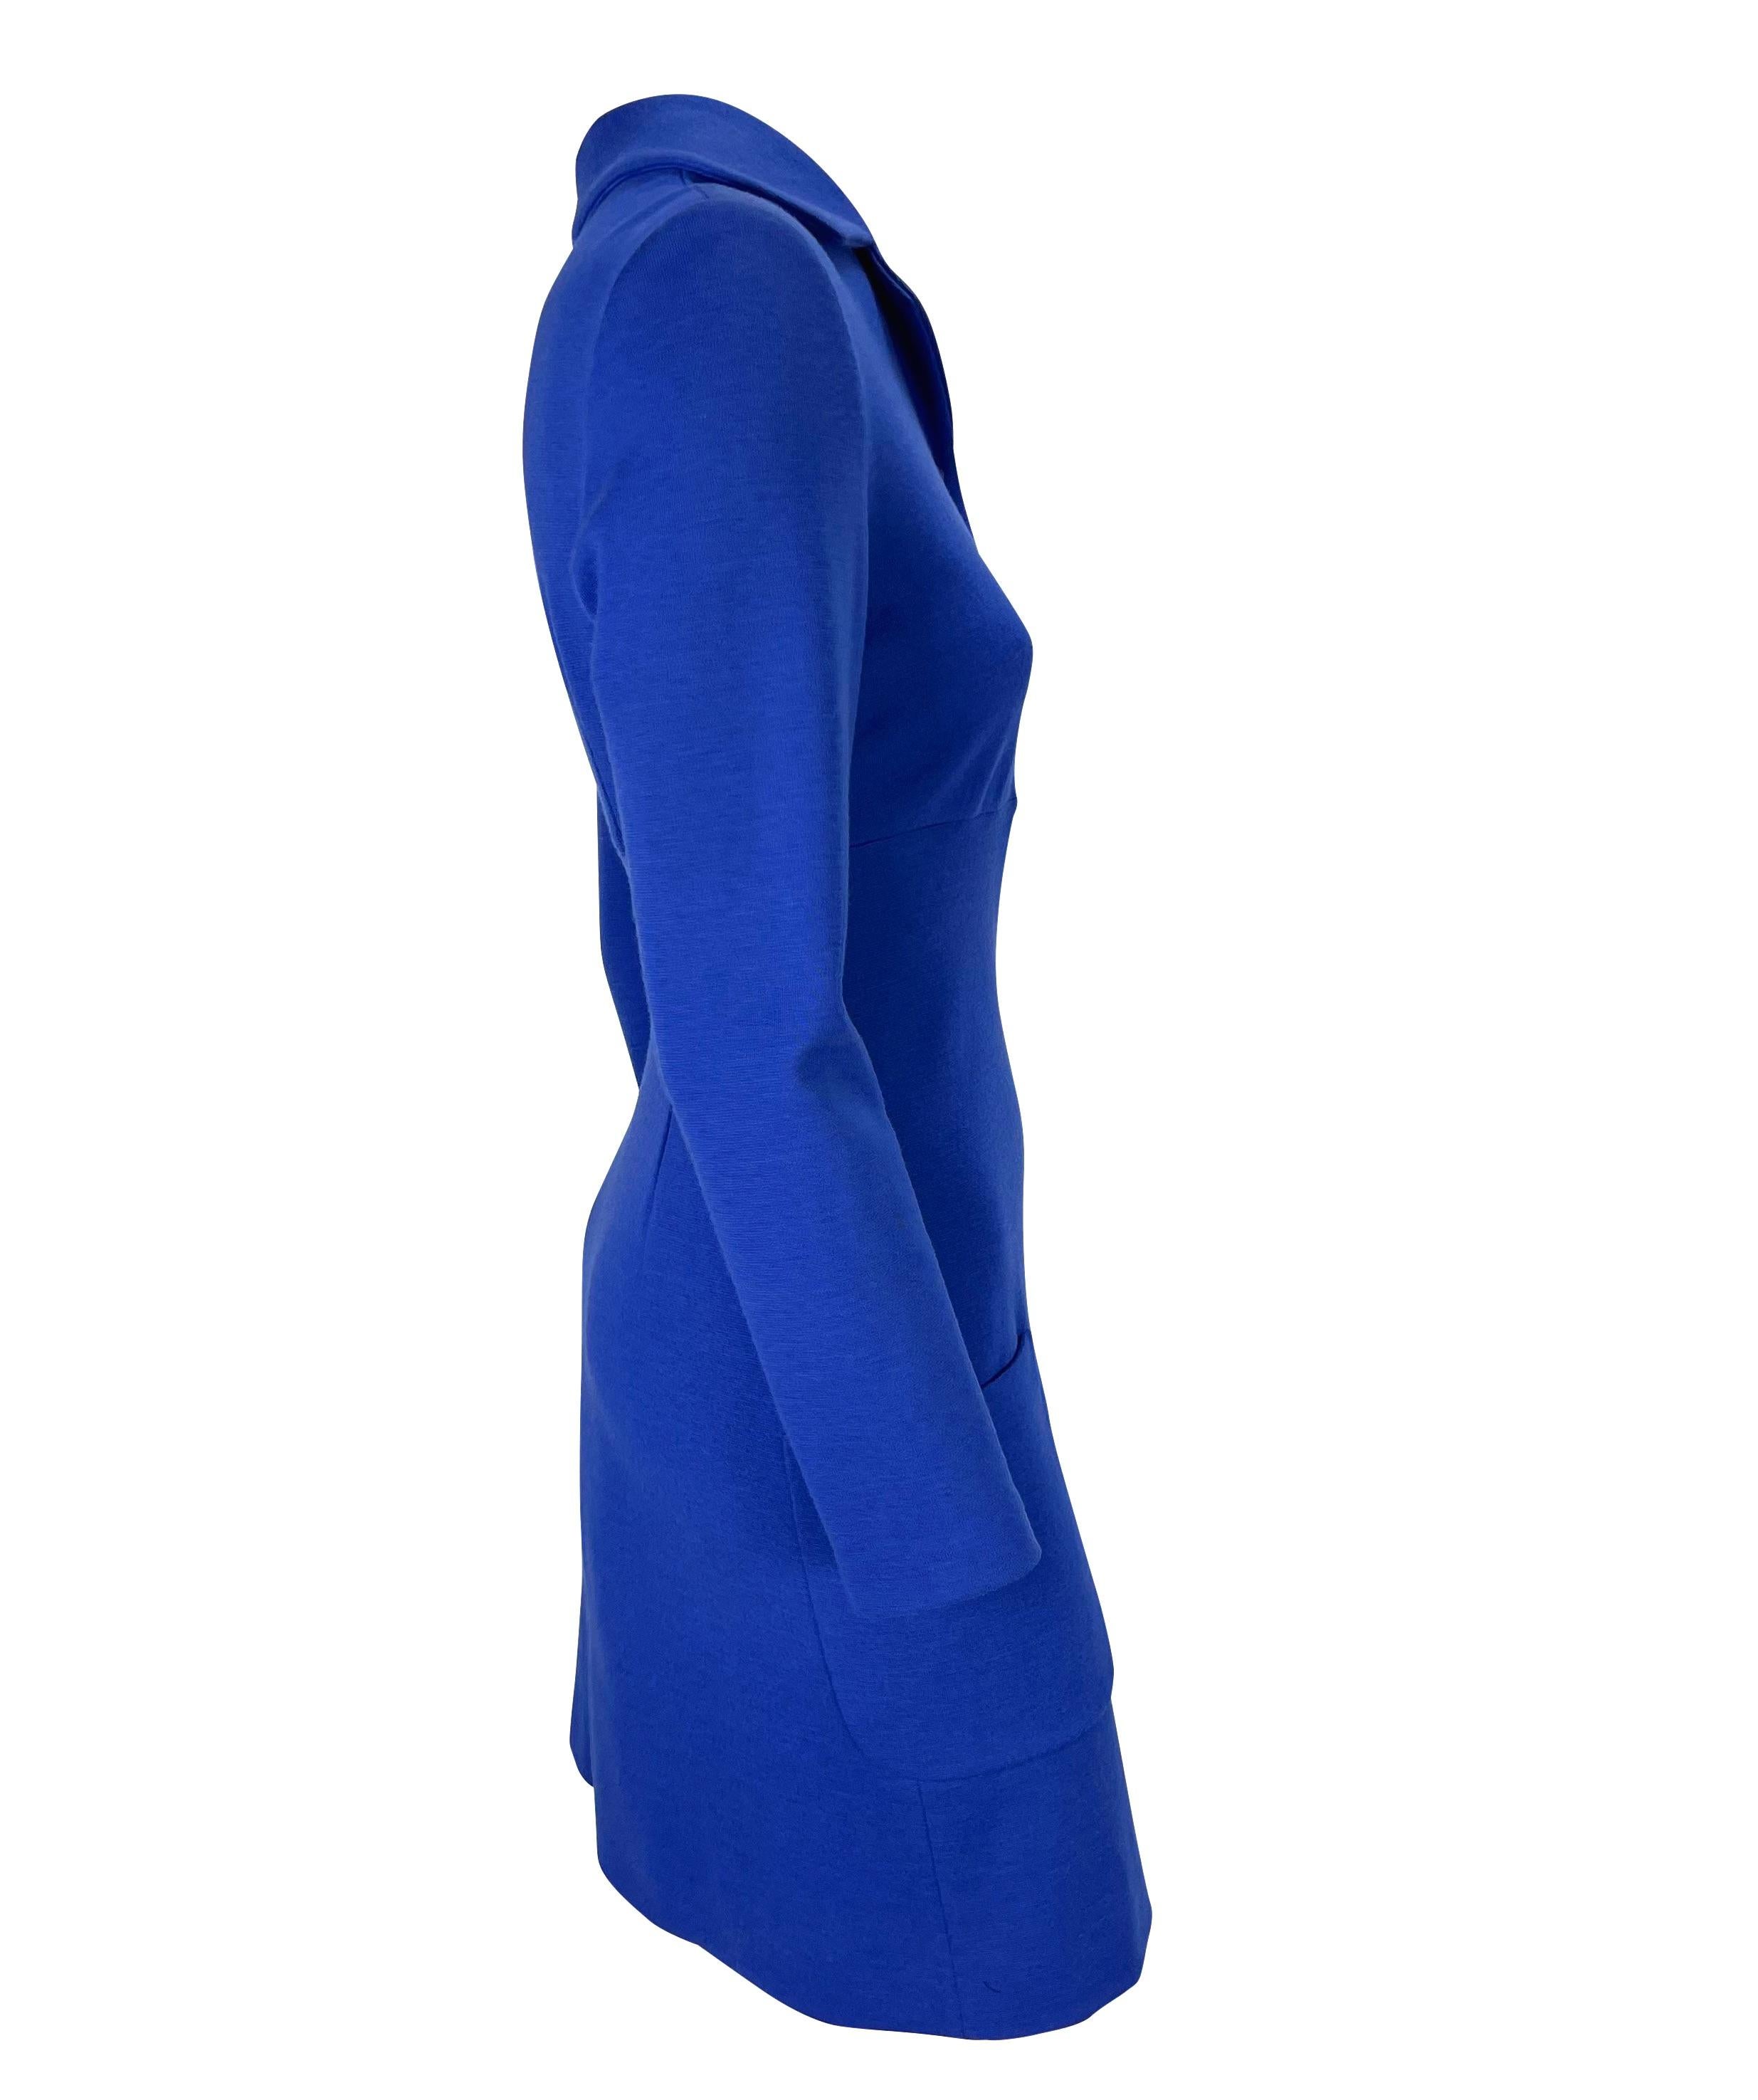 F/W 1996 Gianni Versace Couture Royal Blue Wool Medusa Cinched Button Dress  For Sale 1